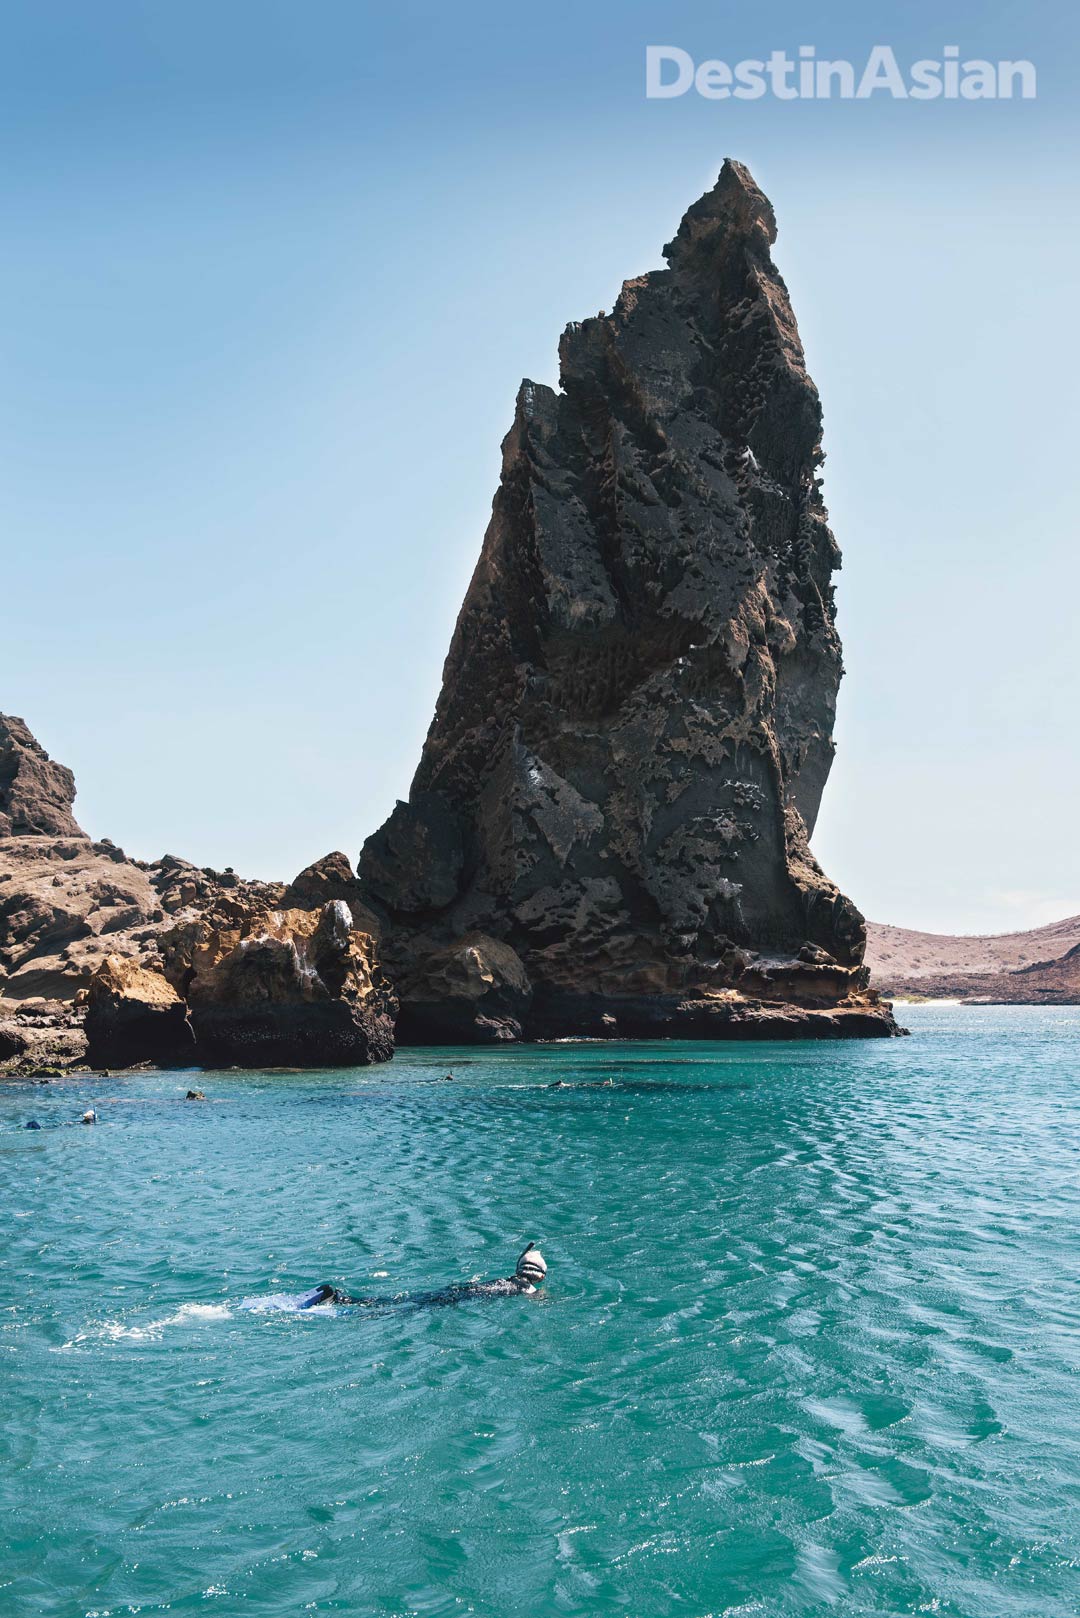 Snorkelers braving the cold waters off Bartolomé Island's iconic Pinnacle Rock.